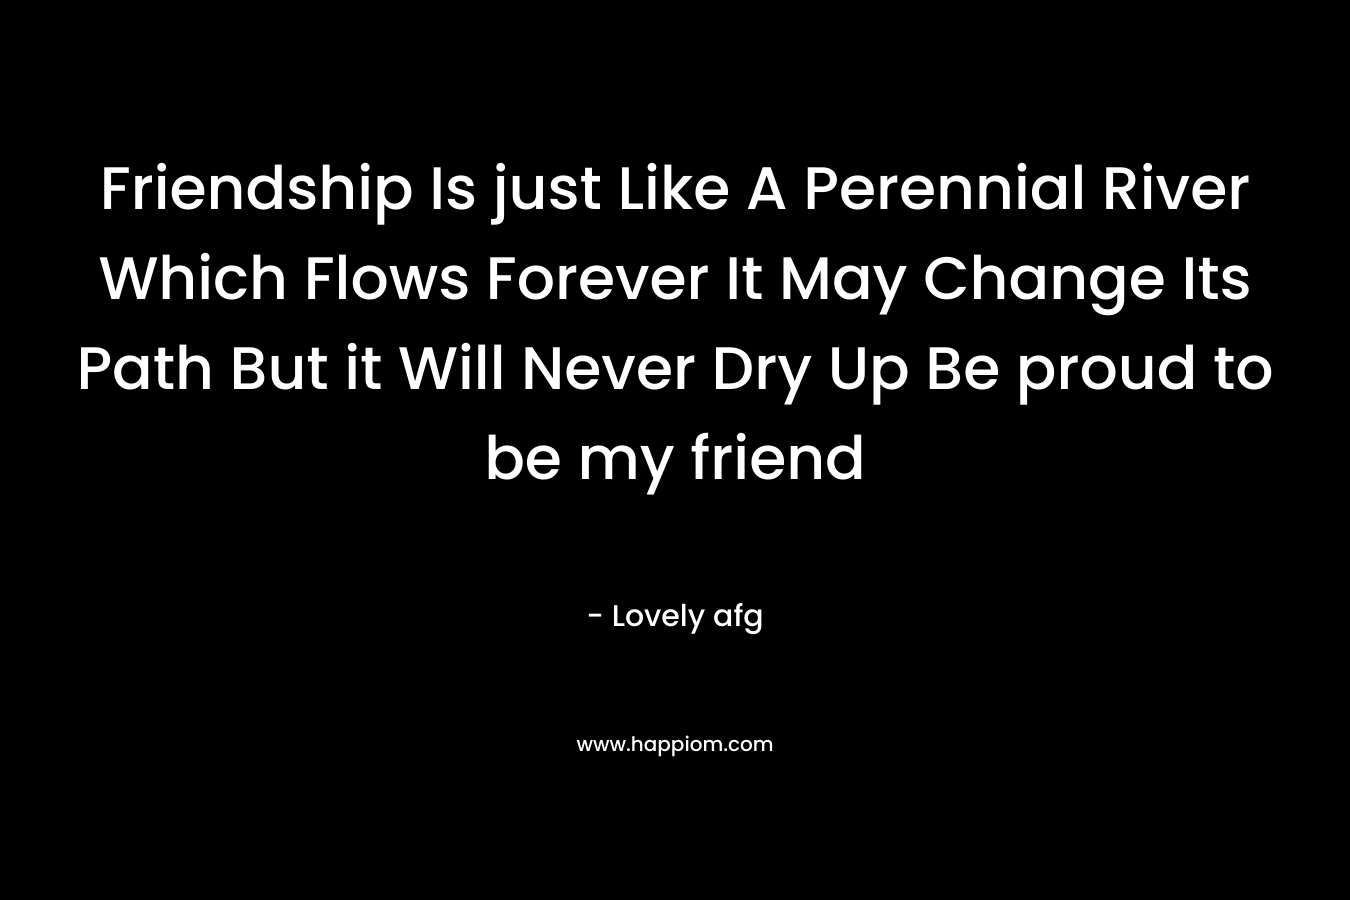 Friendship Is just Like A Perennial River Which Flows Forever It May Change Its Path But it Will Never Dry Up Be proud to be my friend – Lovely afg